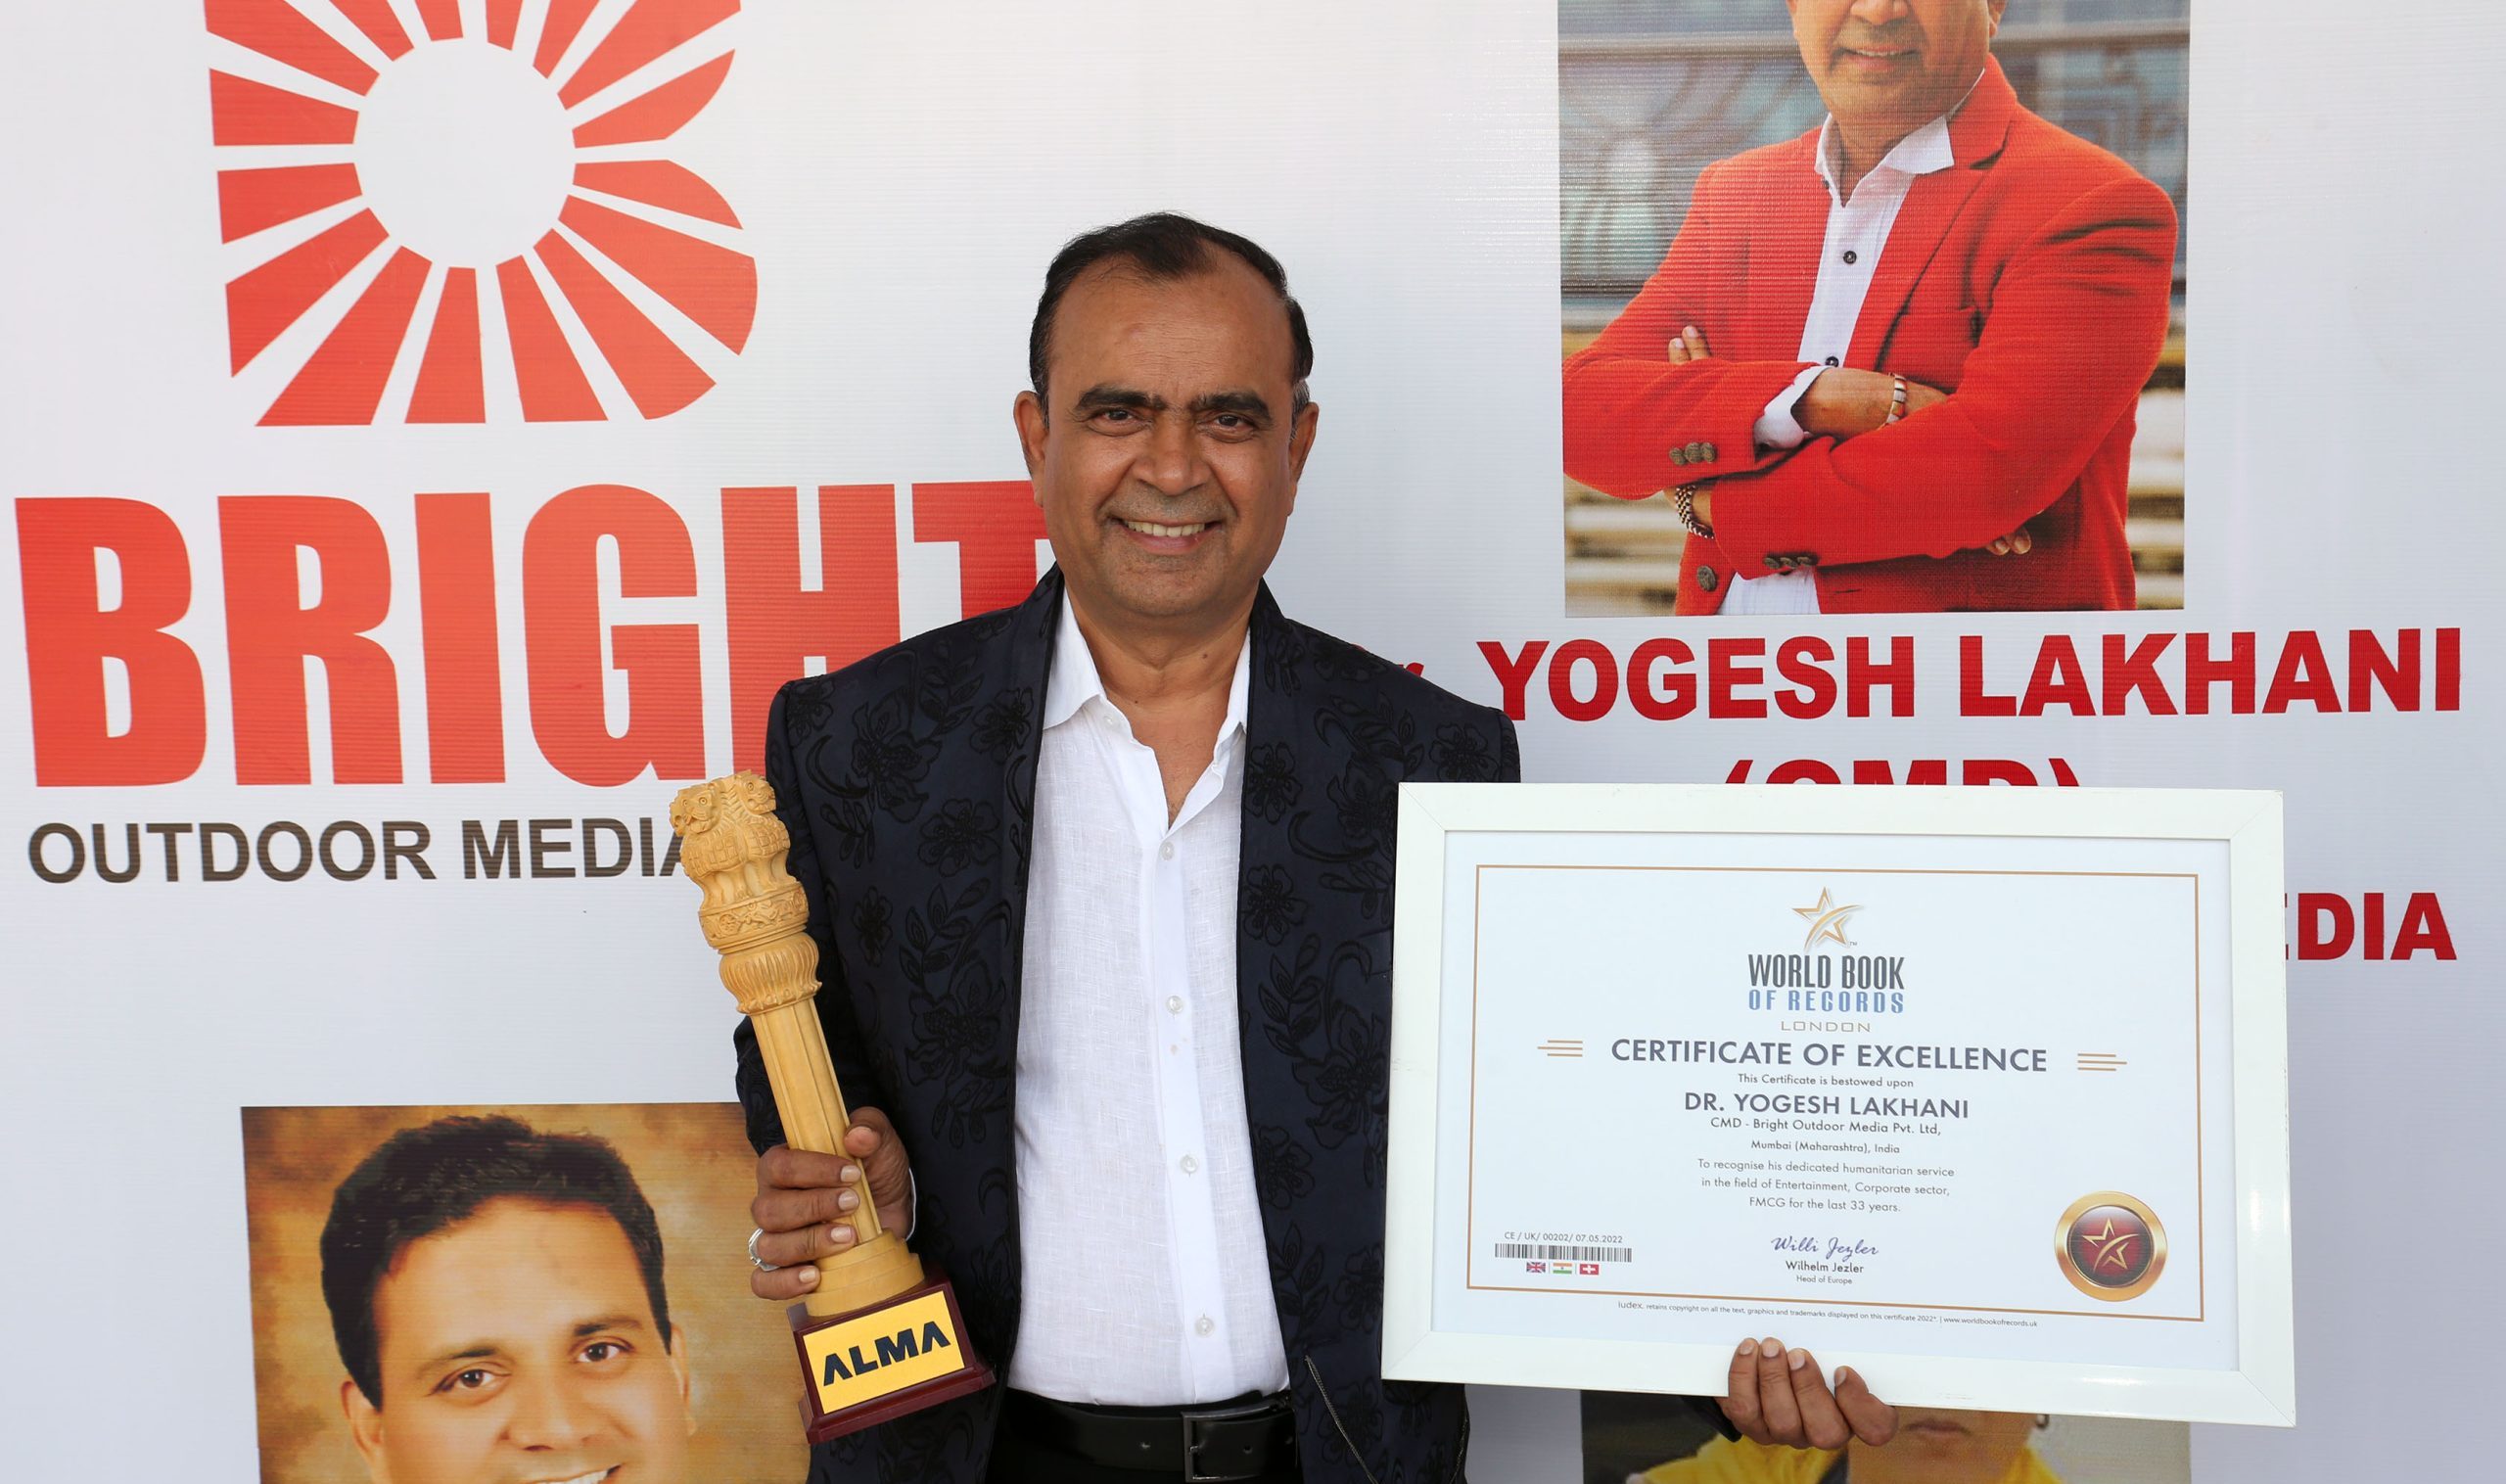 World Book Of Records adds Dr Yogesh Lakhani CMD, Bright Outdoor Media’s name in the list of felicitation!